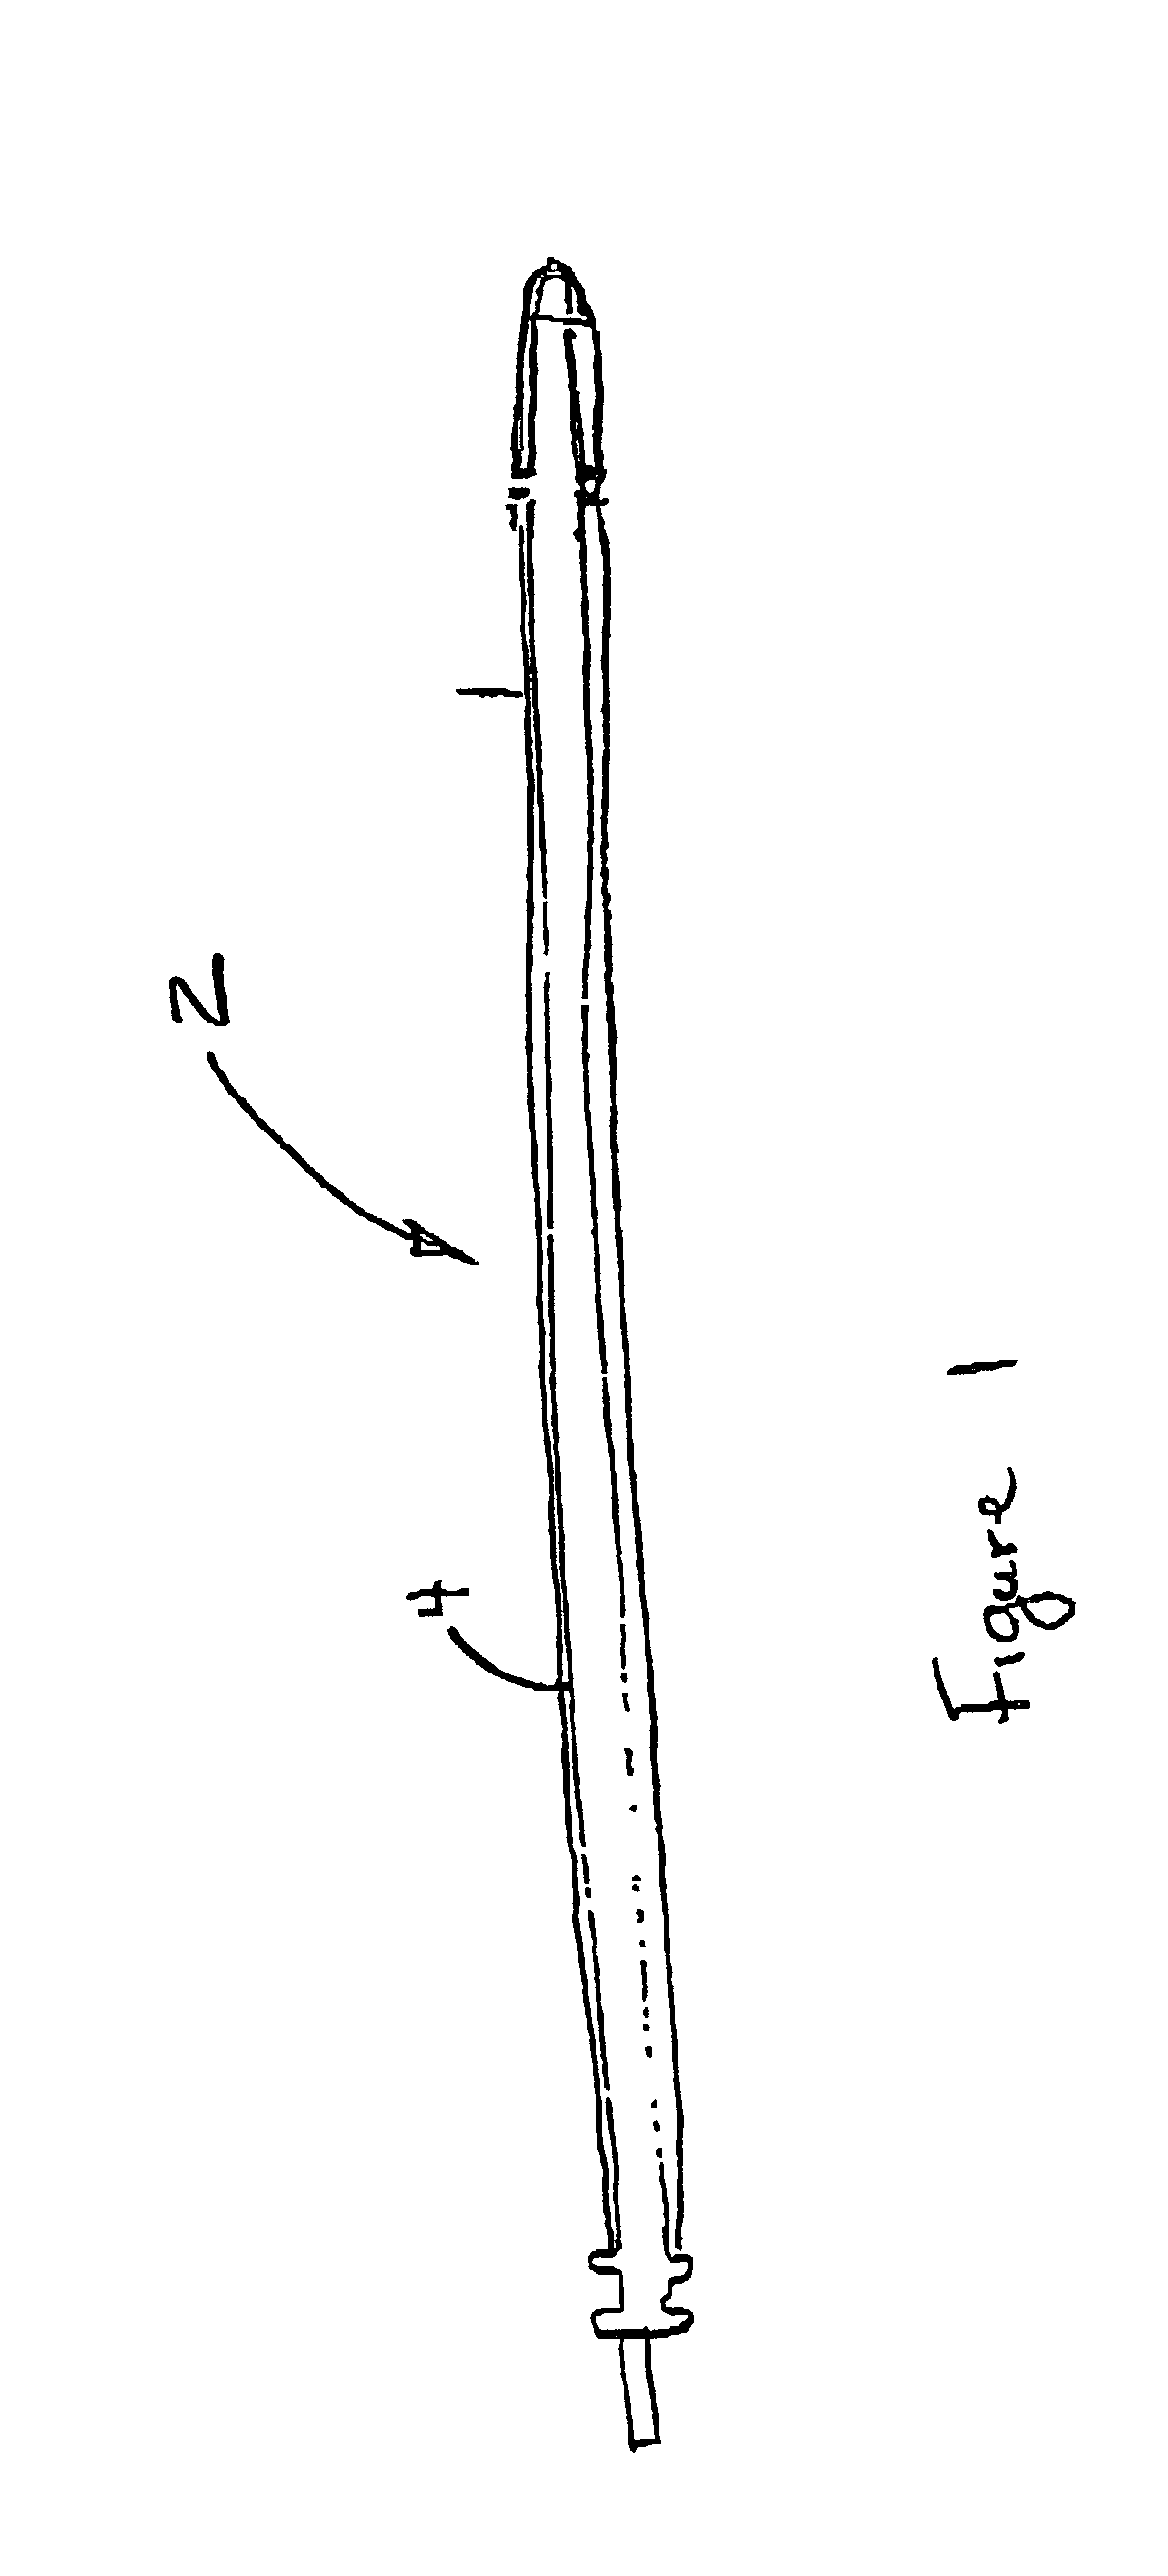 Implantable medical device having biologically active polymeric casing